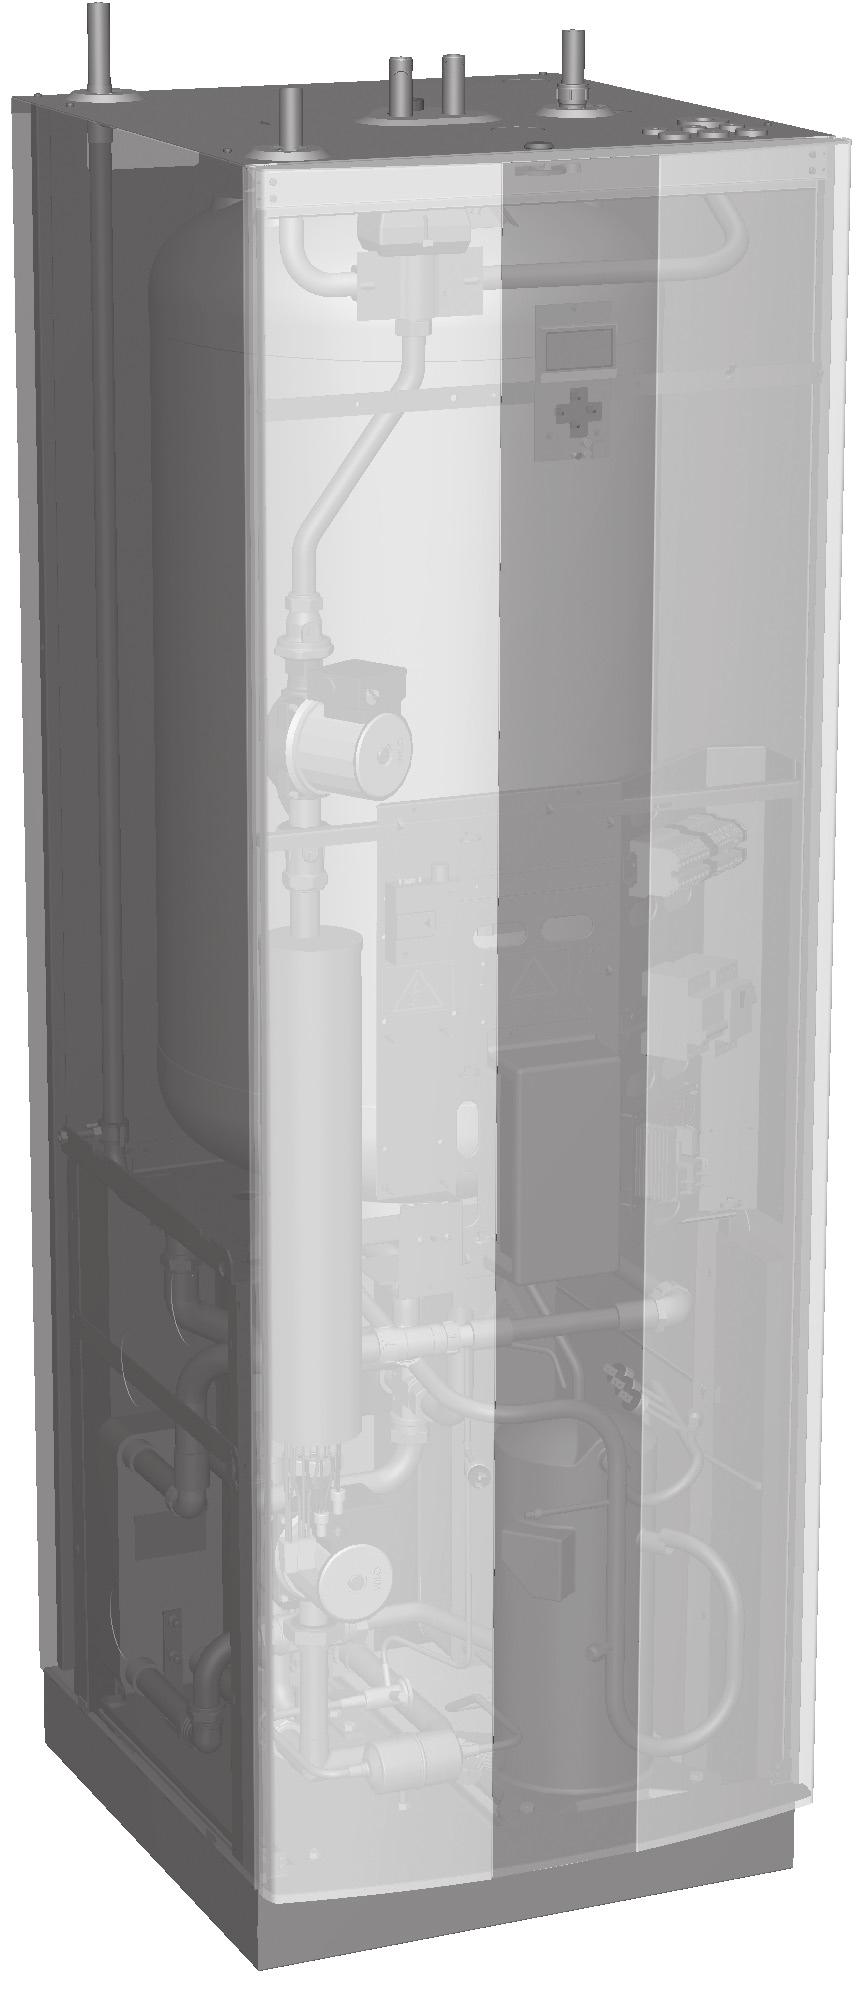 Technical Data Danfoss DHP-C Provides heating, cooling and hot water TWS technology provides hot water quickly with low operating costs A built in 180 litre water tank Main parts... 2 Bipack contents.